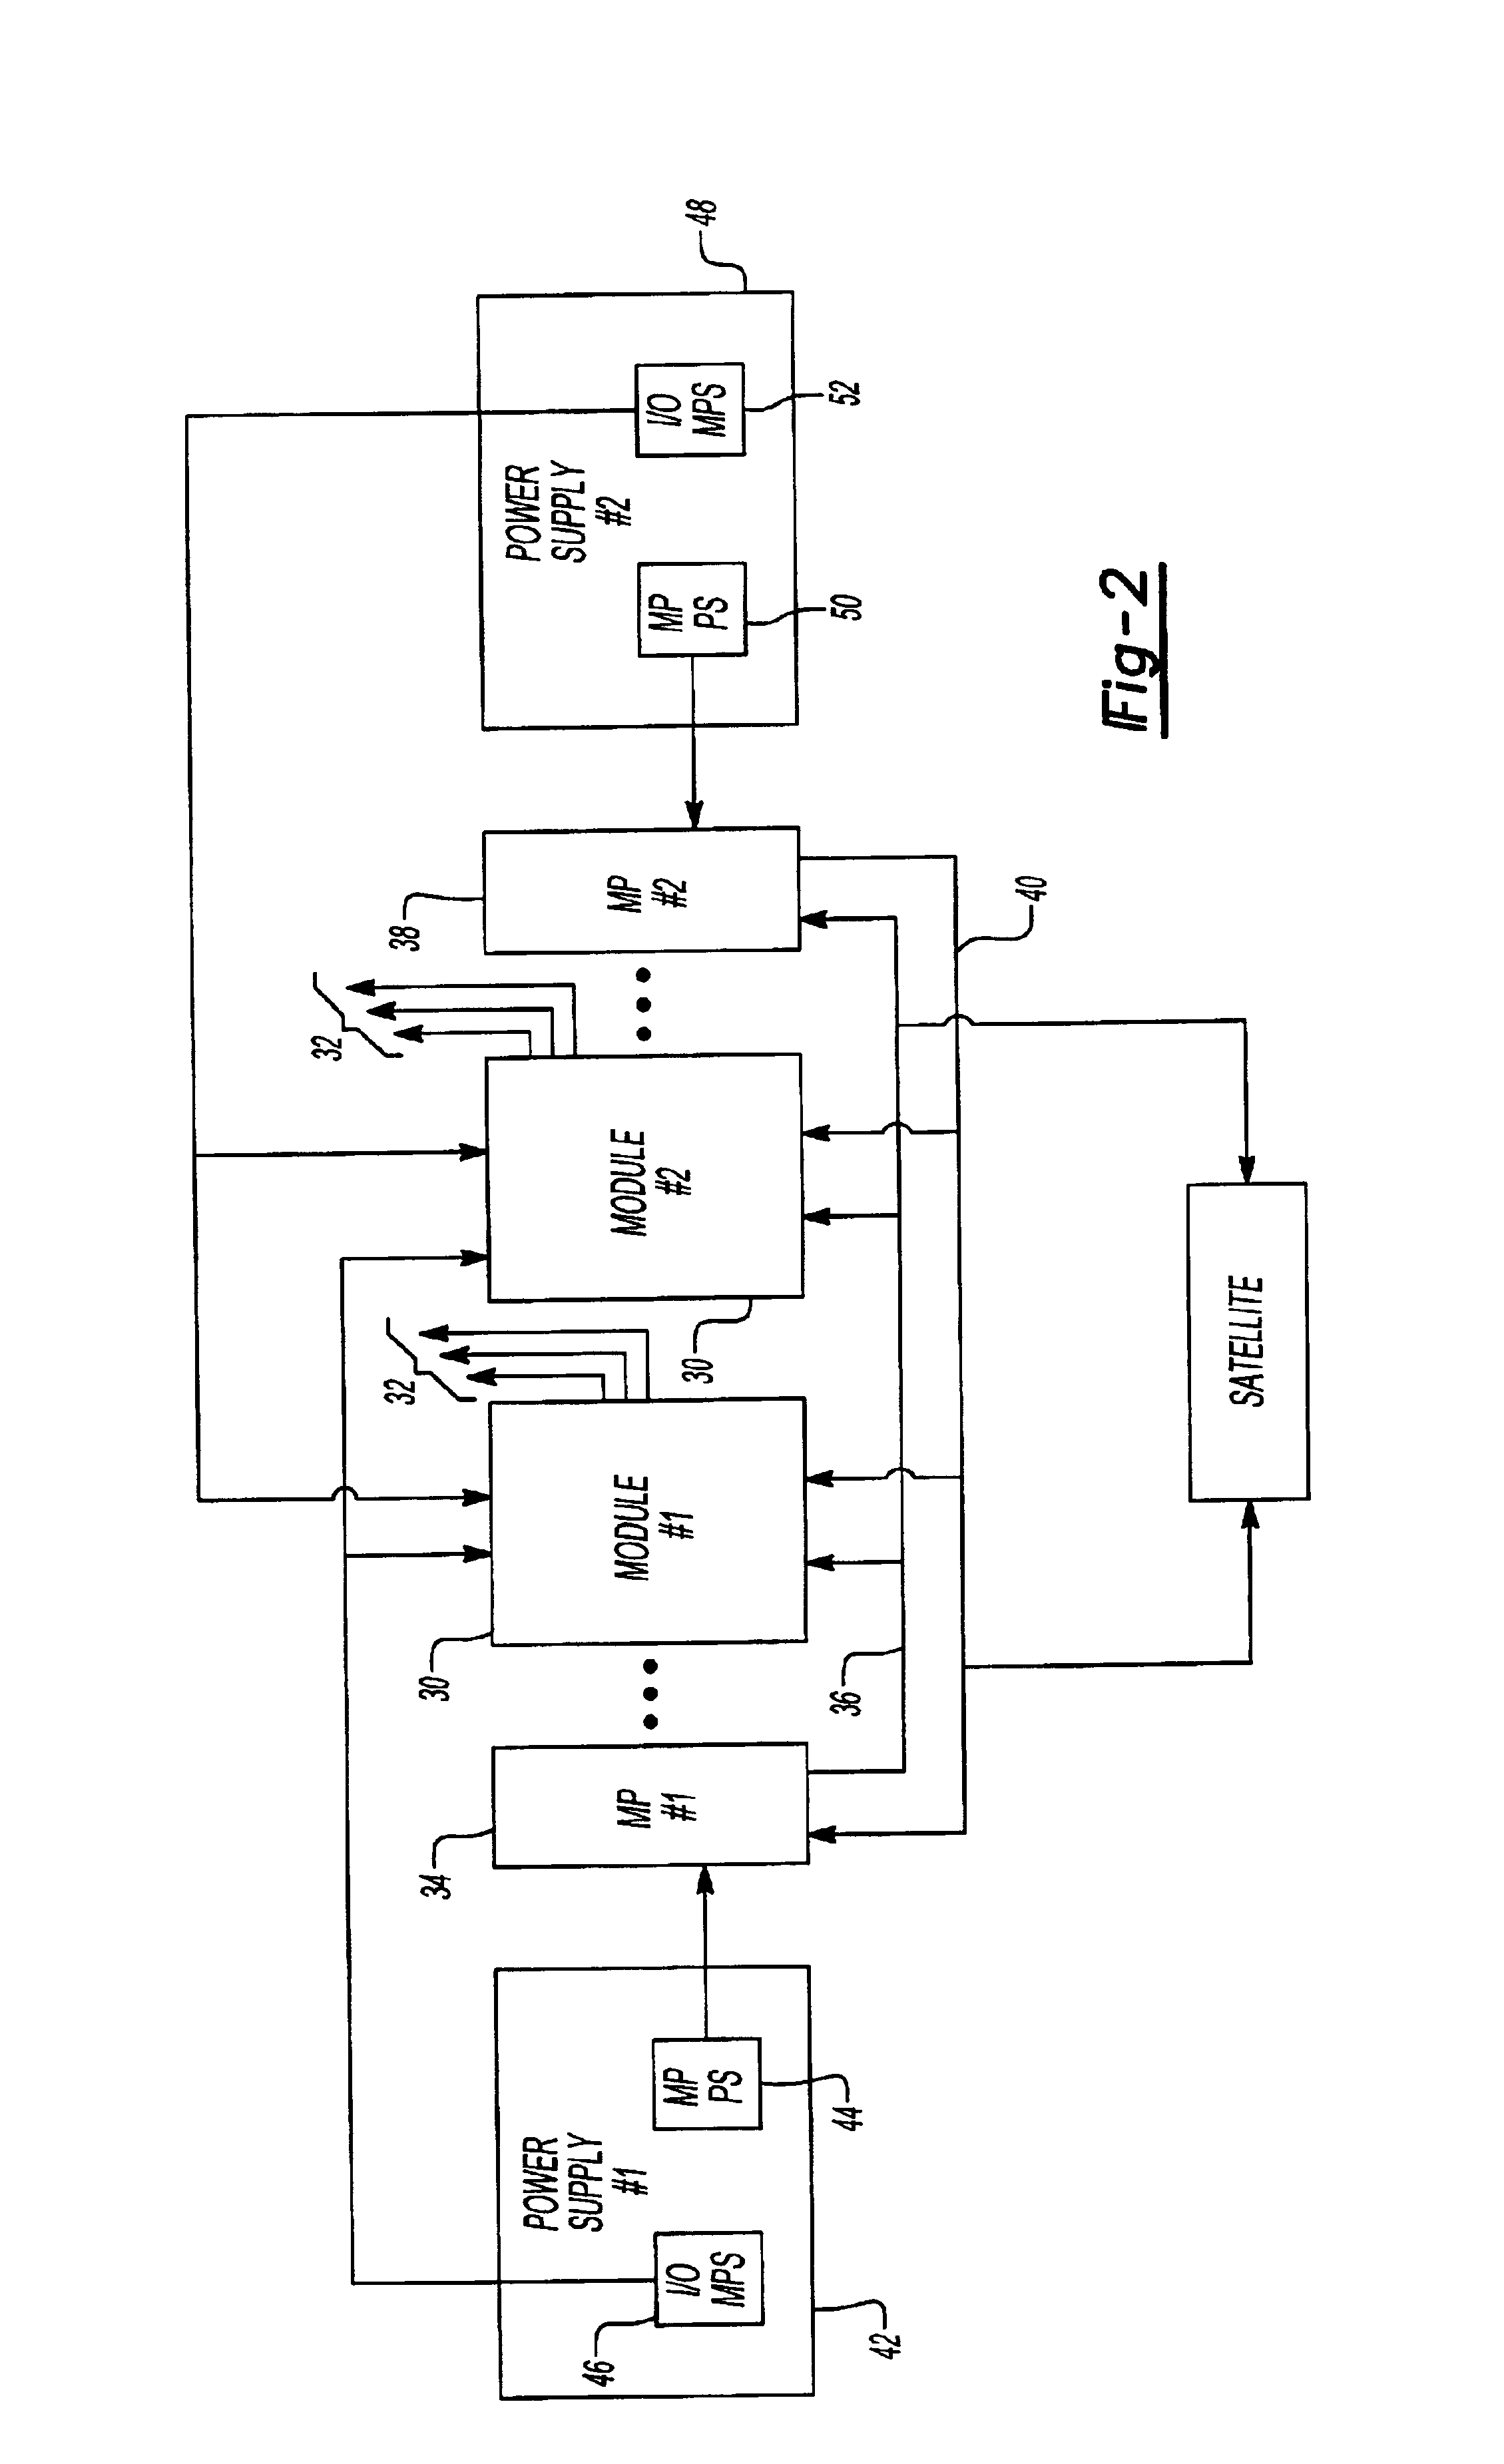 Power distribution assembly with redundant architecture